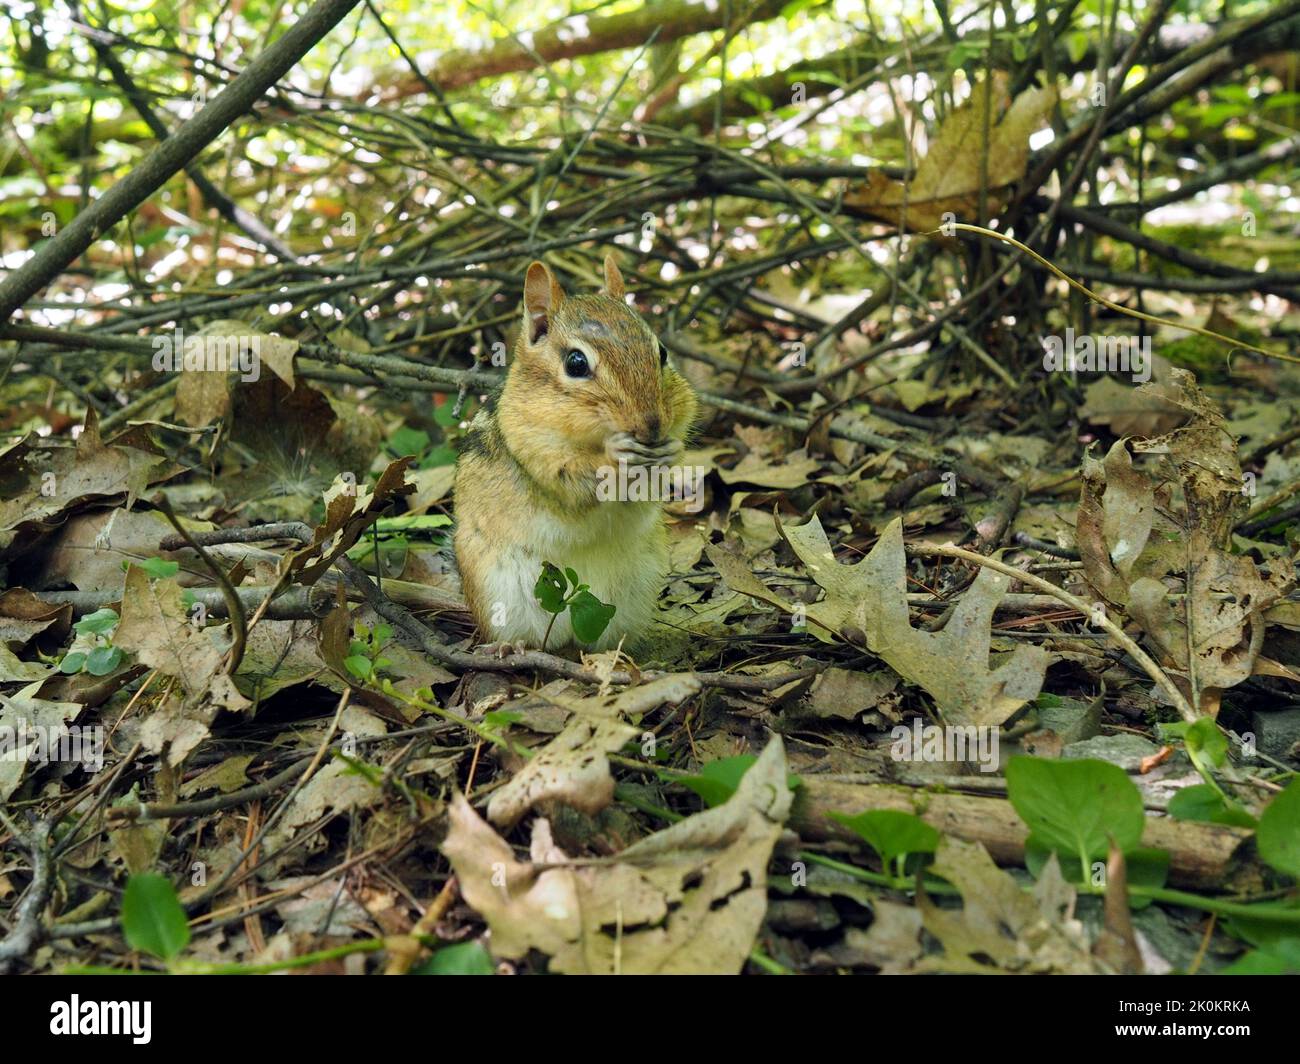 A very camouflaged and very cute eastern chipmunk (Tamias striatus) sitting in the leaf litter, eating seeds. Stock Photo